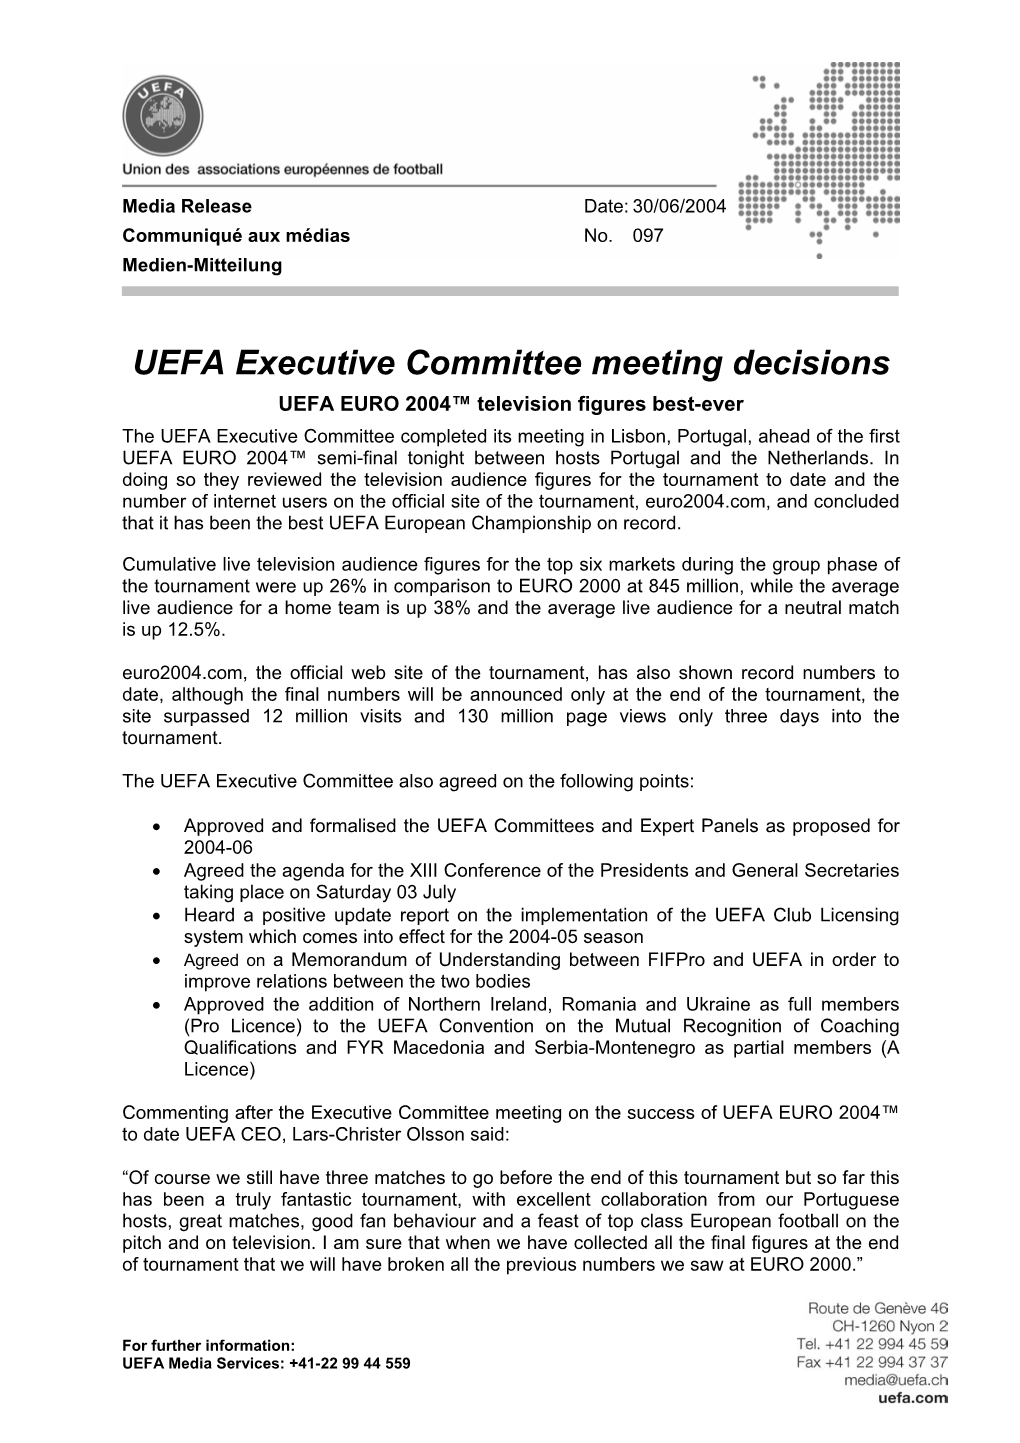 UEFA Executive Committee Meeting Decisions